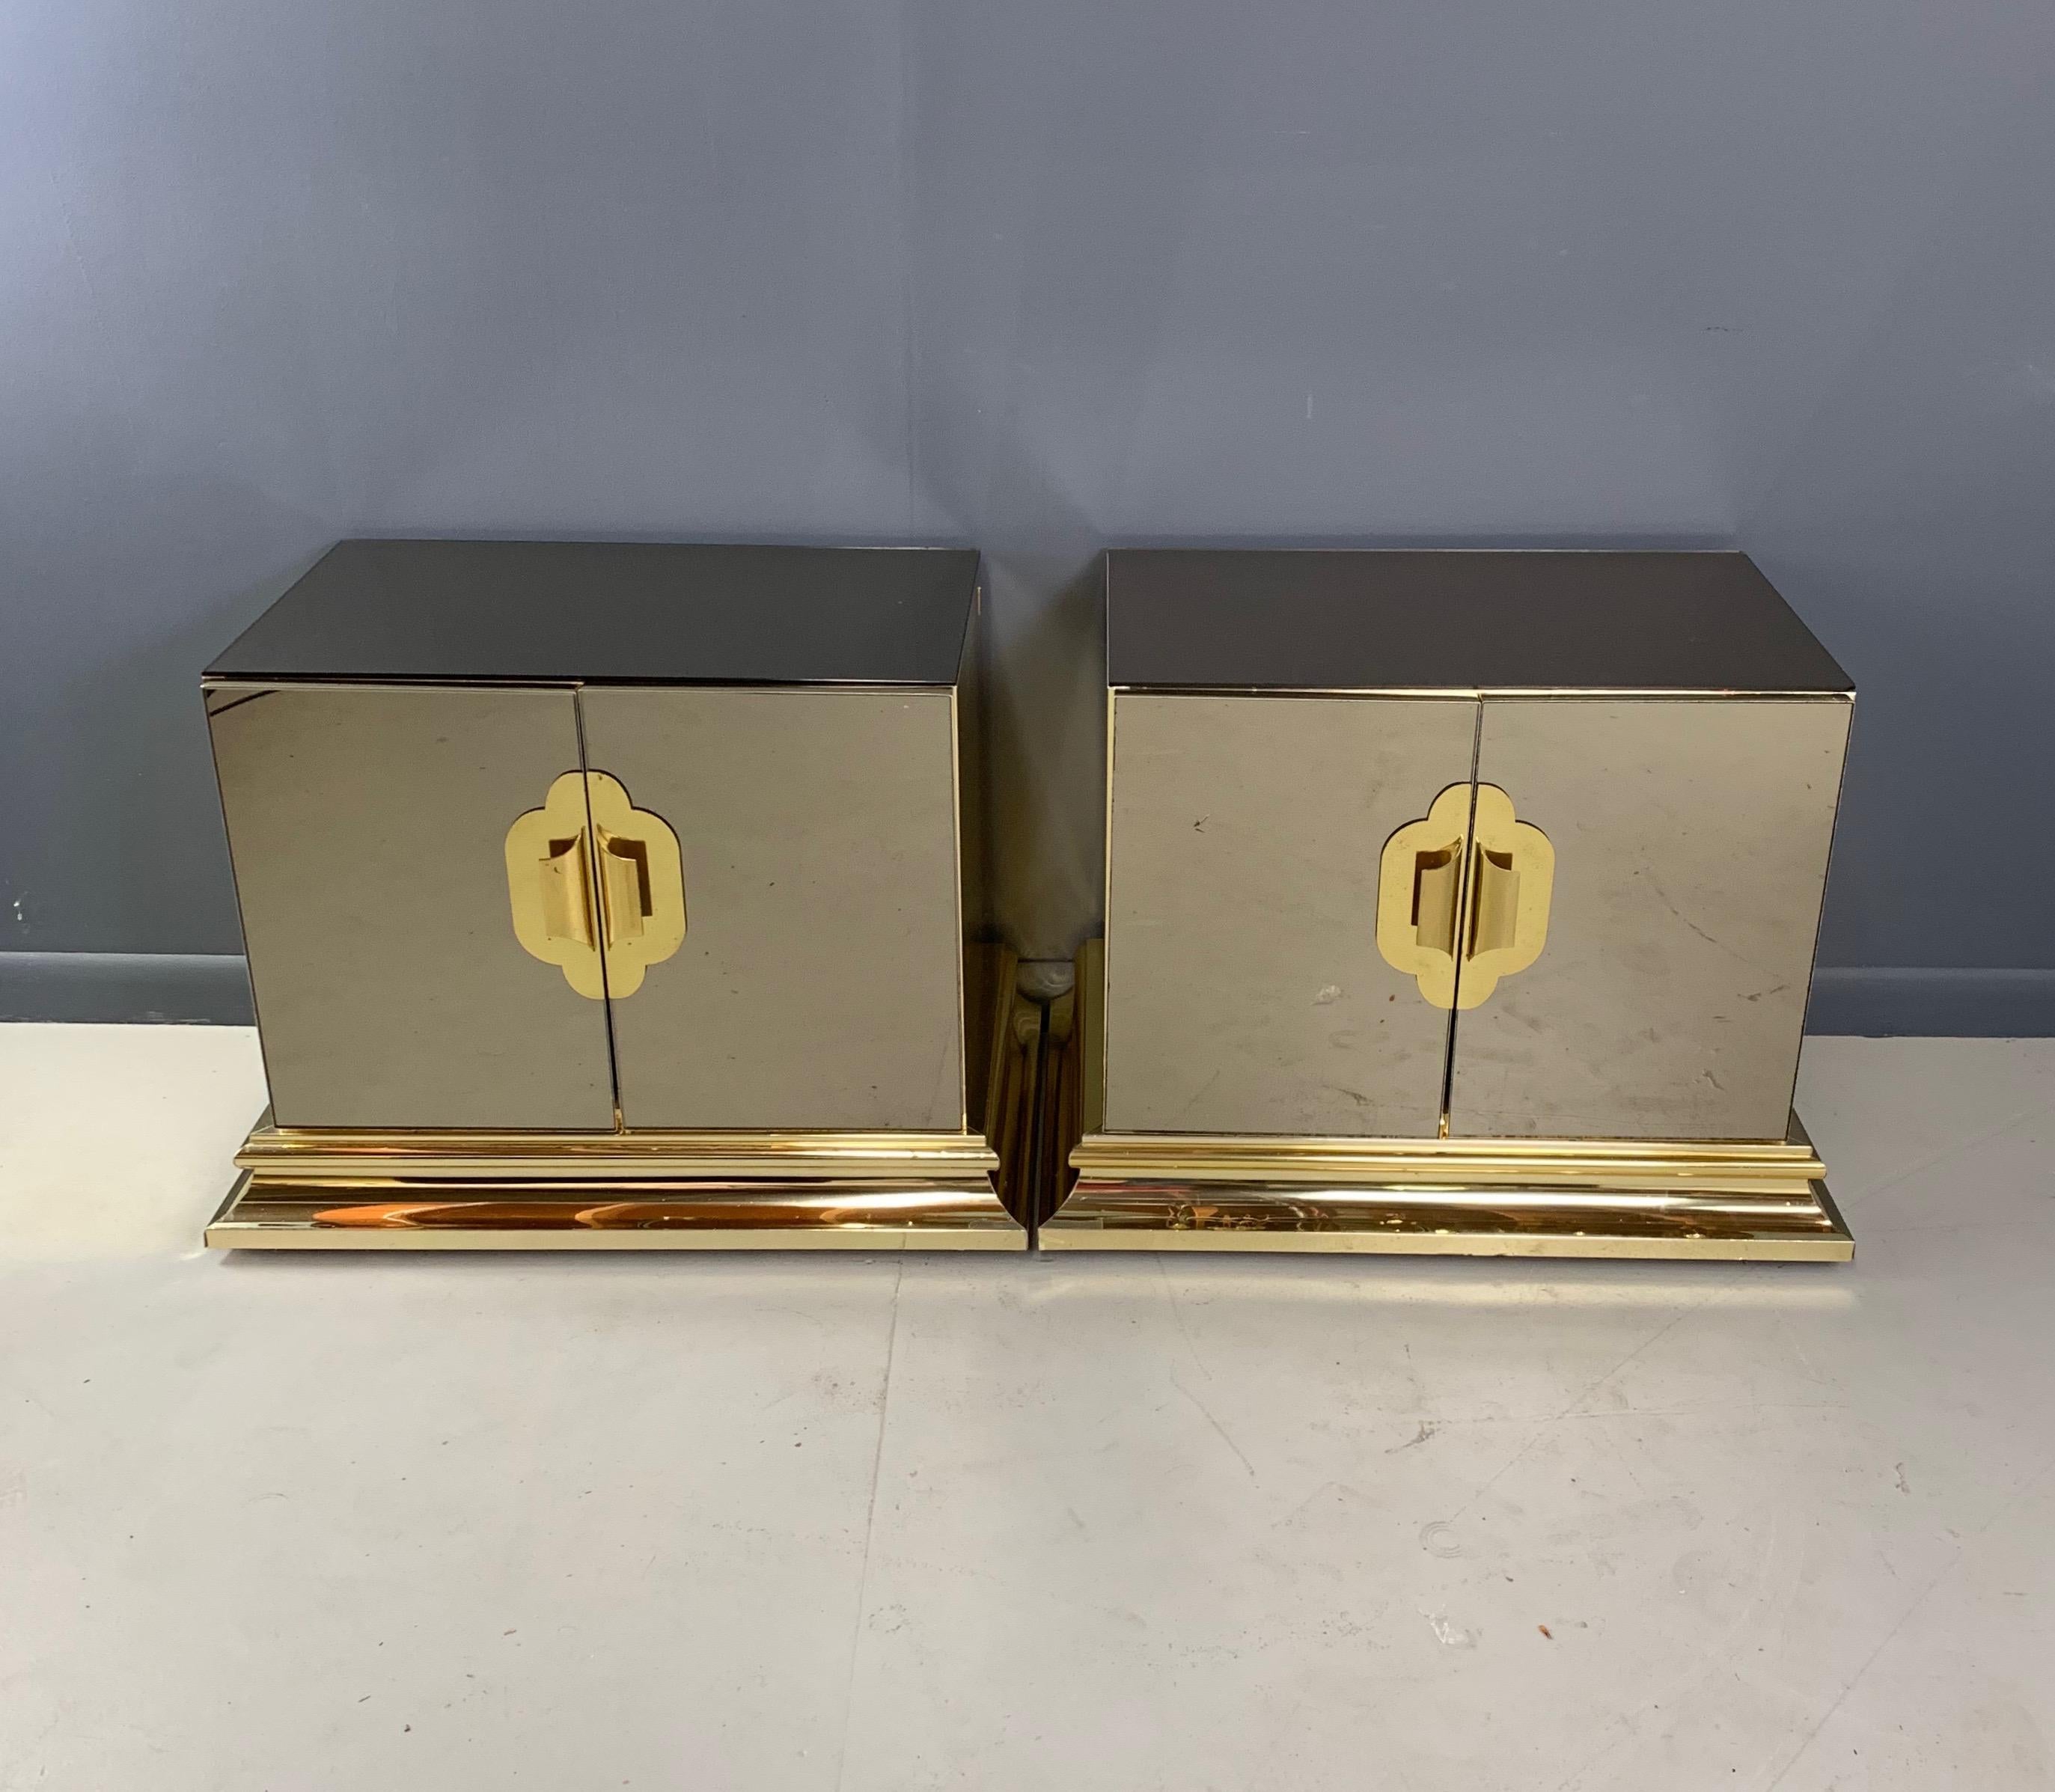 A truly wonderful pair of smoked mirrored nightstands with brass accents, sides and bases produced by Ello Corporation in the 1980s.